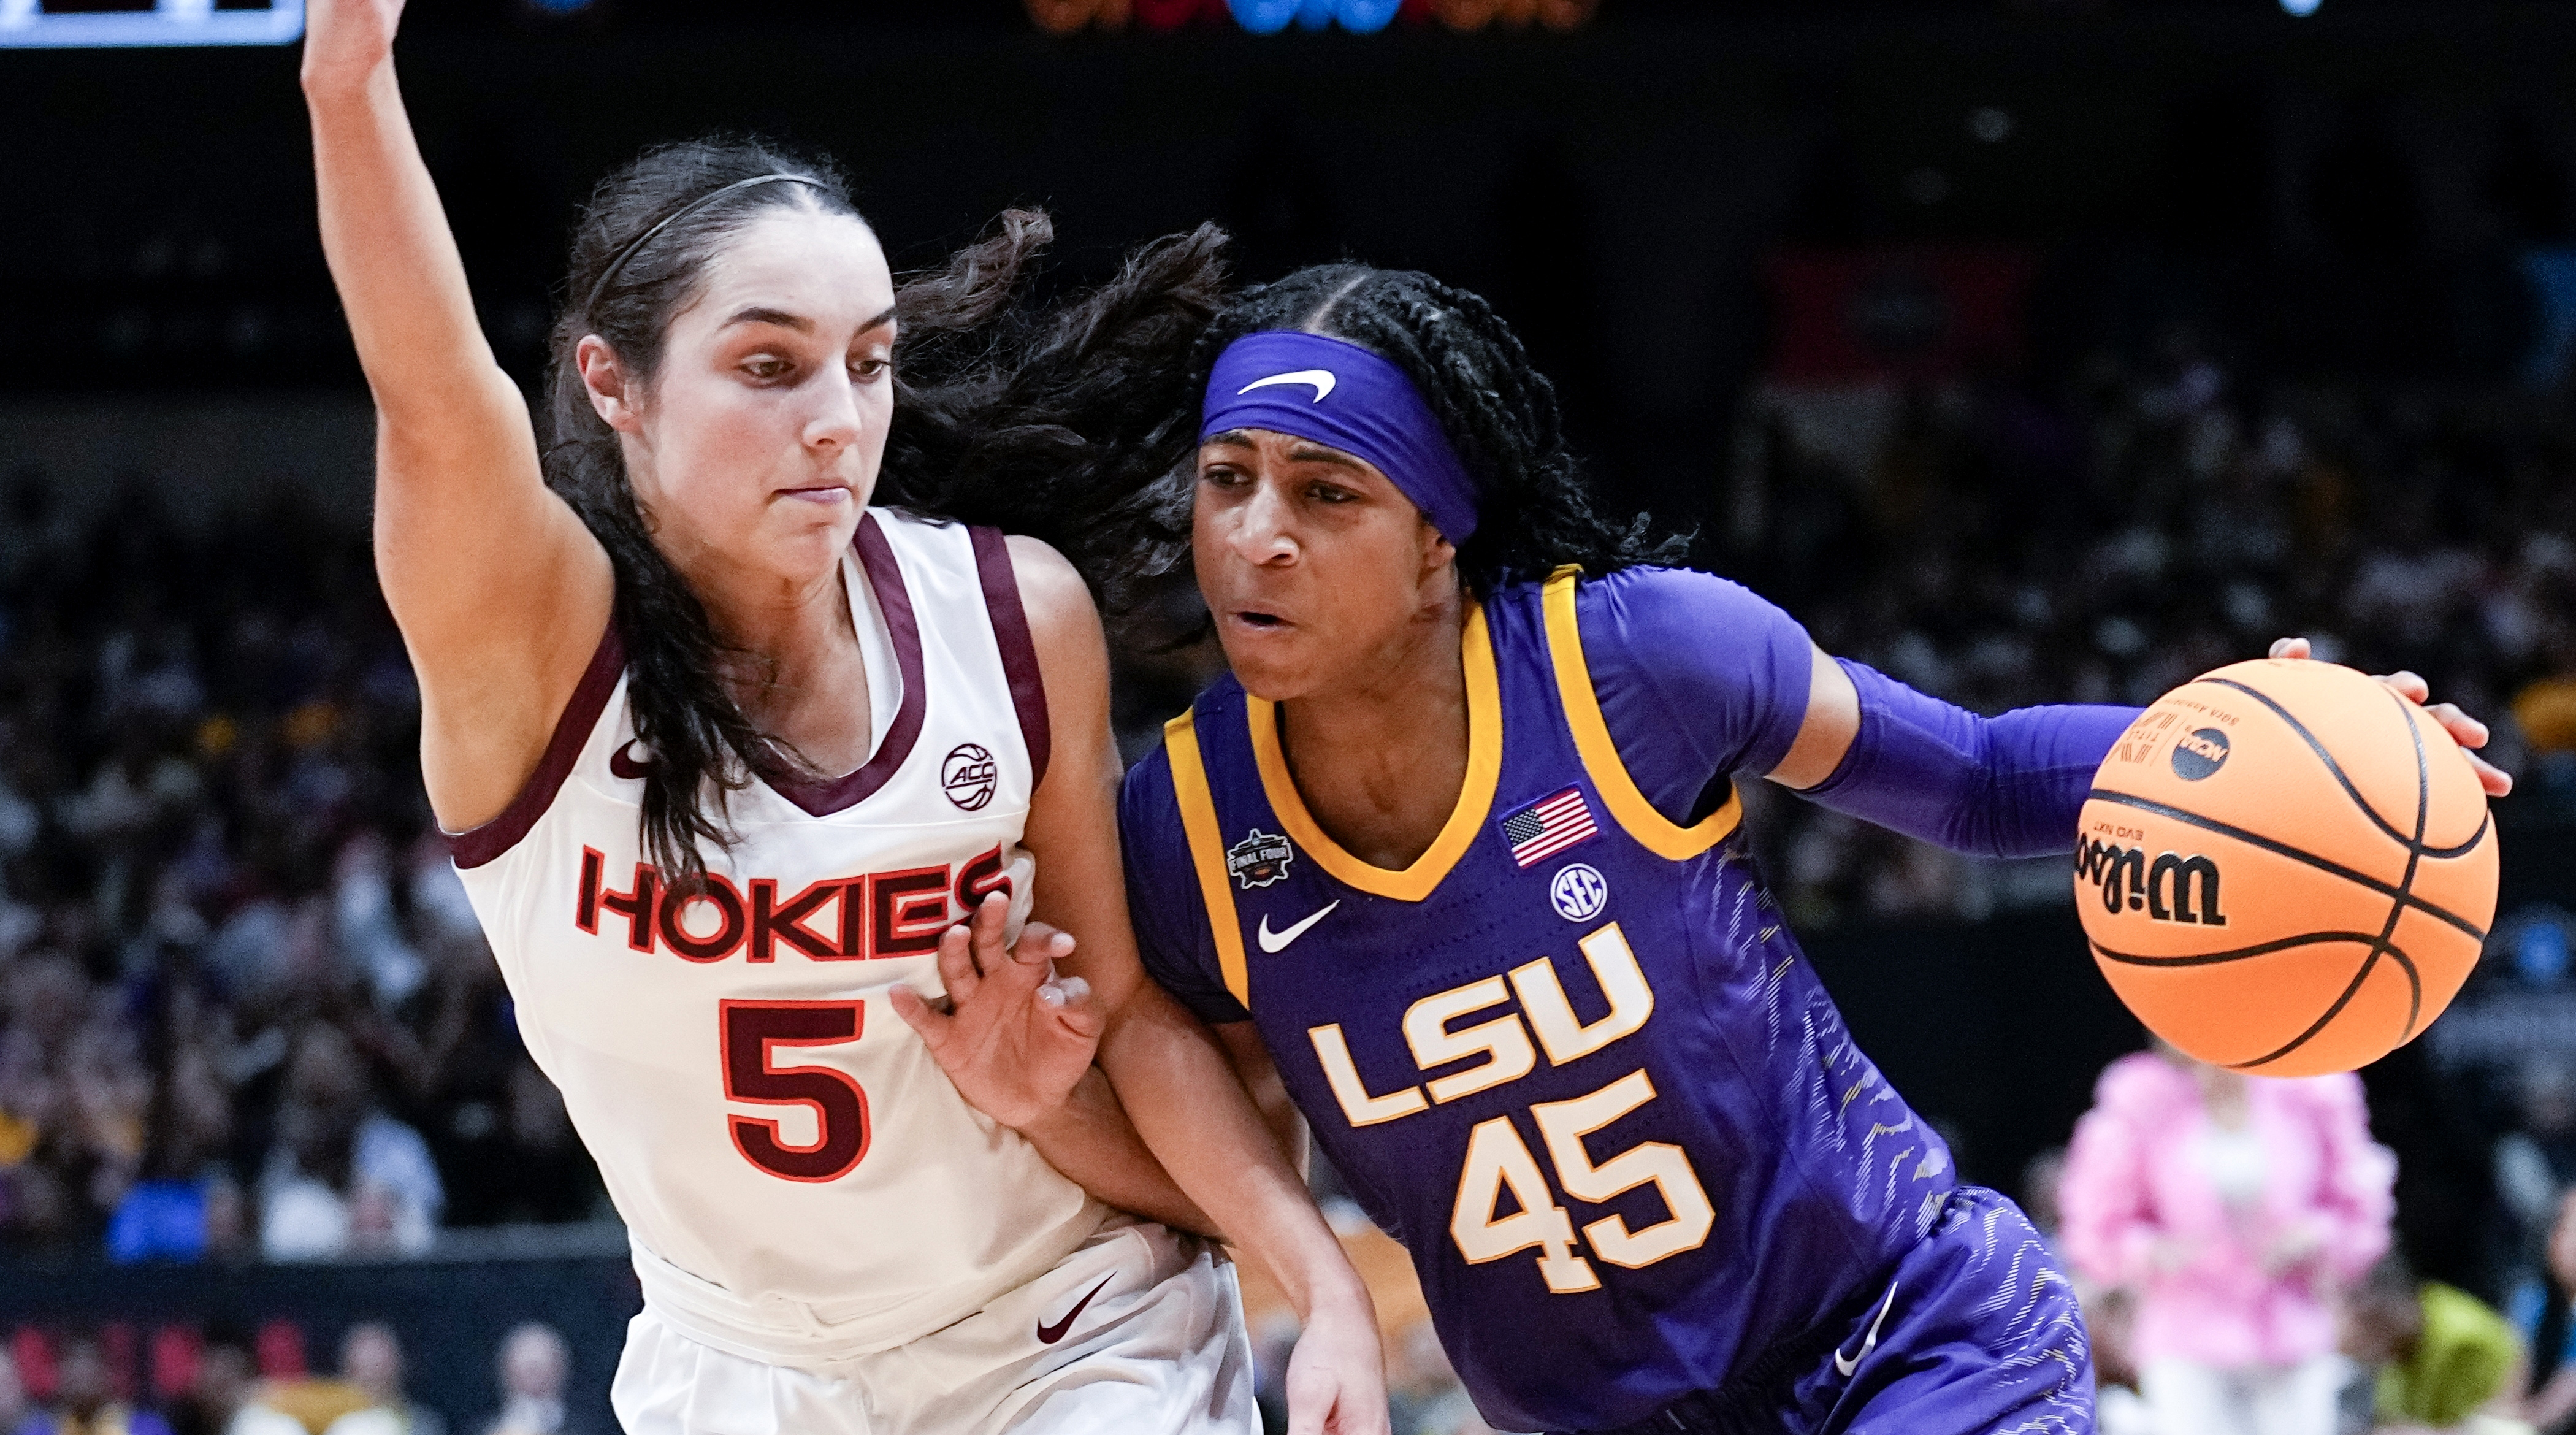 LSU’s Alexis Morris drives past Virginia Tech’s Georgia Amoore during the first half of an NCAA Women’s Final Four semifinals.